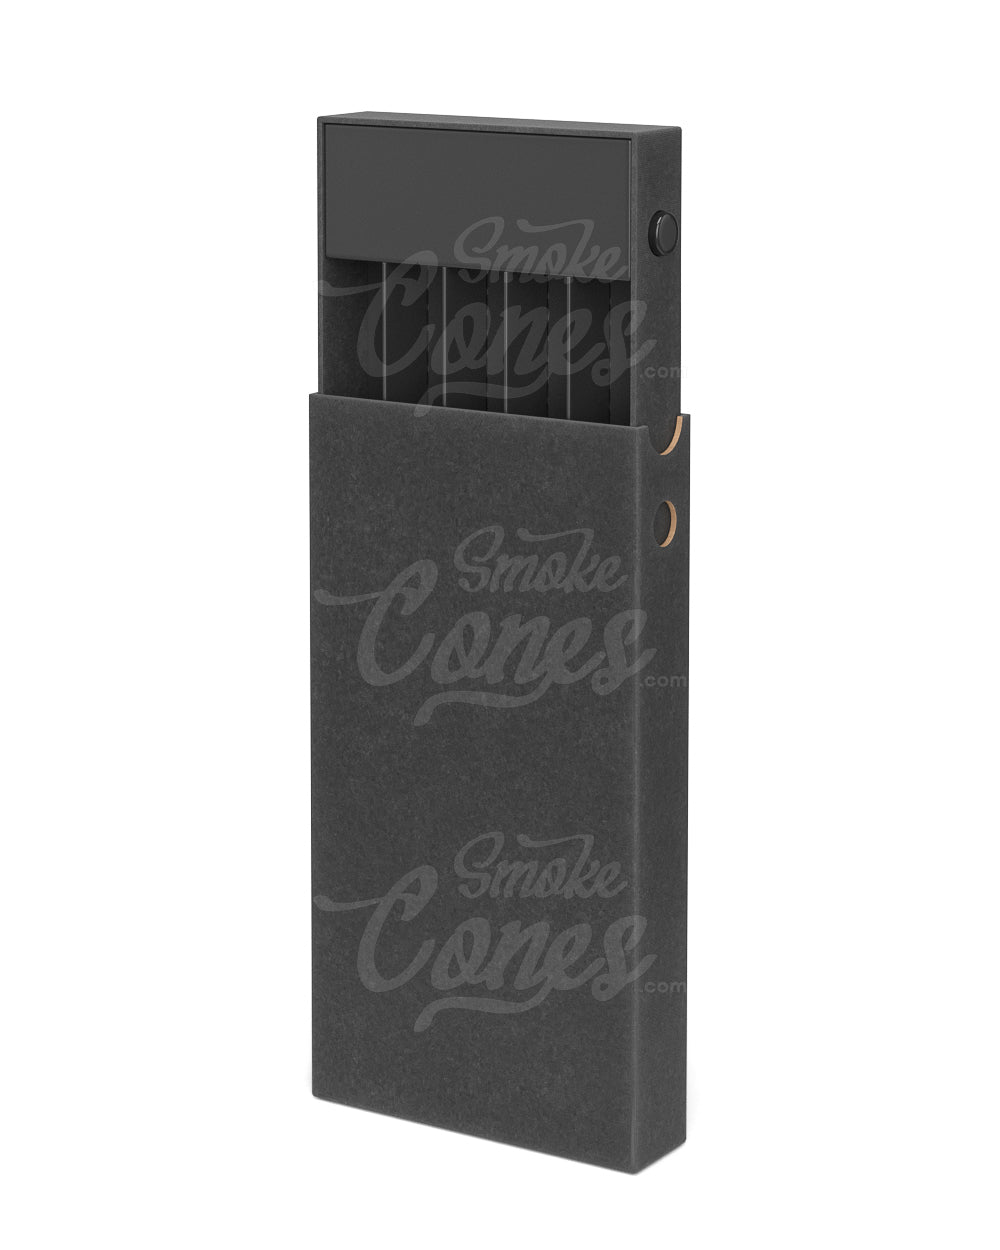 Child Proof Pre Roll Joints Container - 420 Packaging